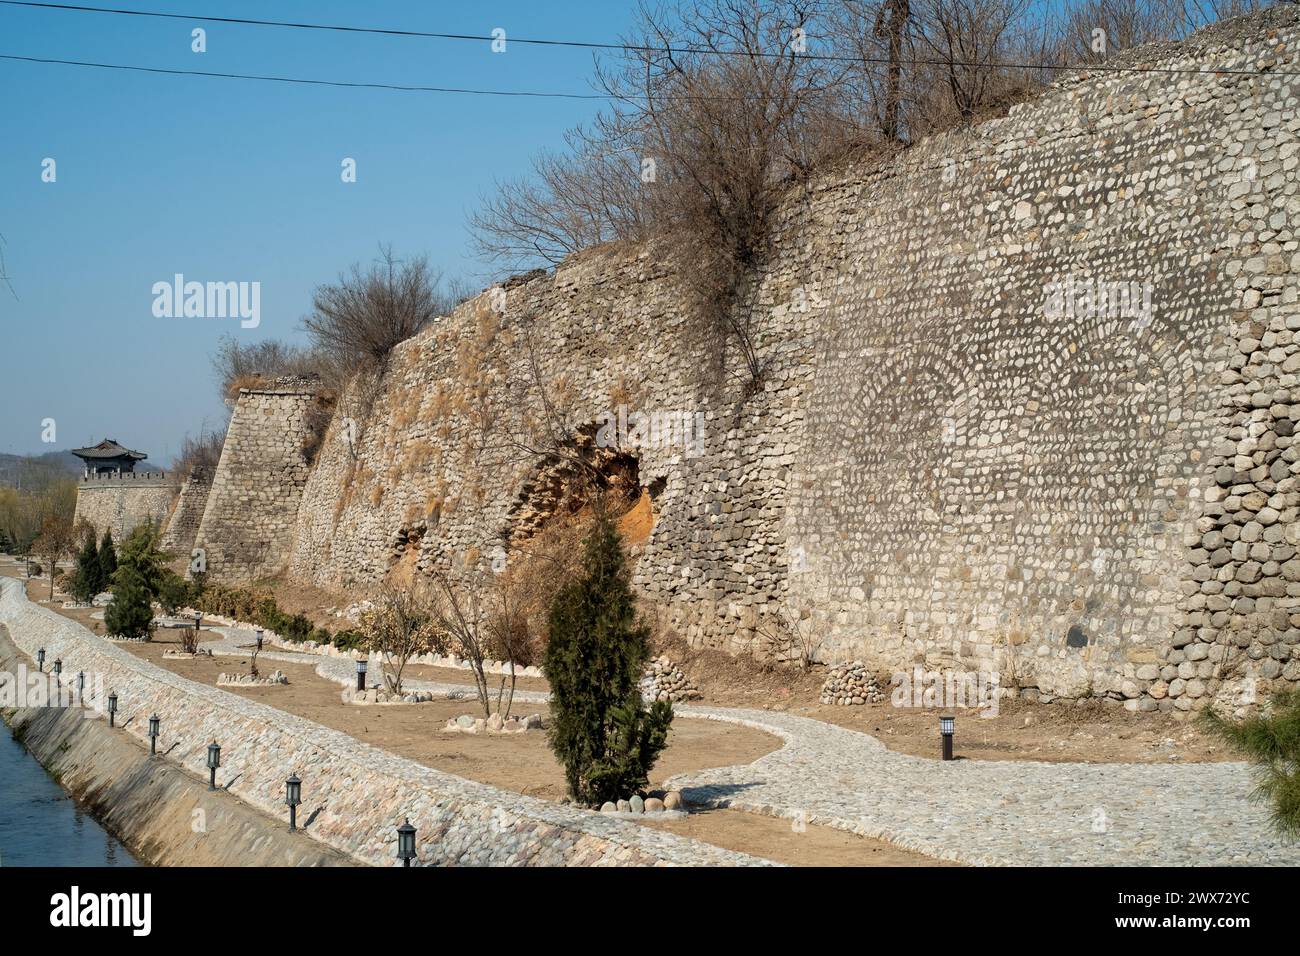 The old city wall of Jingxing, located in Jingxing County, Hebei Province, China, features extensive use of cobblestones for construction. Stock Photo